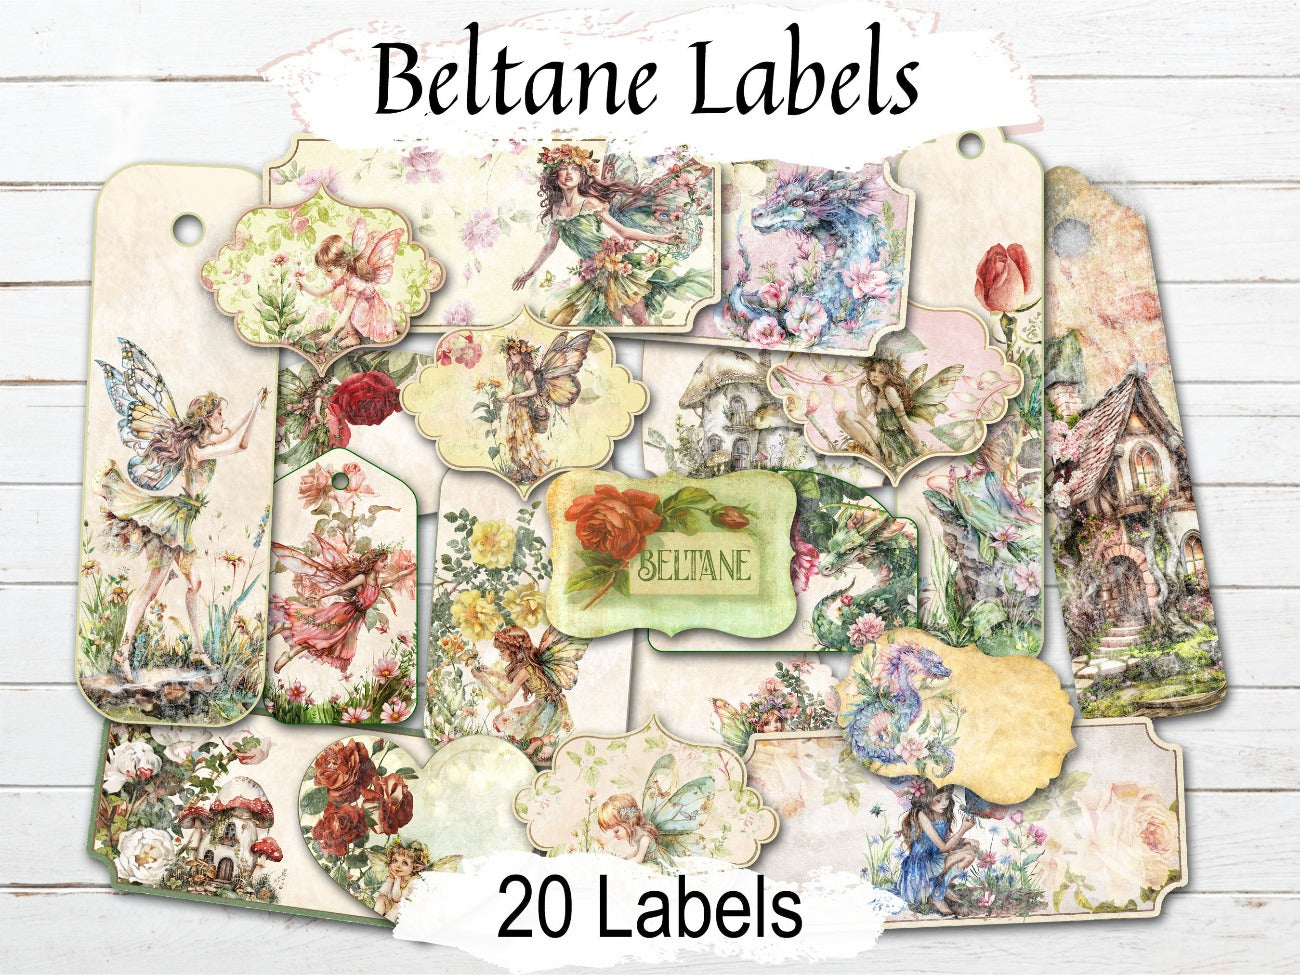 20 BELTANE LABELS Printable Fairy Tags, Witchcraft Botanical Floral Labels, Wicca Sabbat Stickers, Magic Spells Gifts & Altar Decorations - Morgana Magick Spell